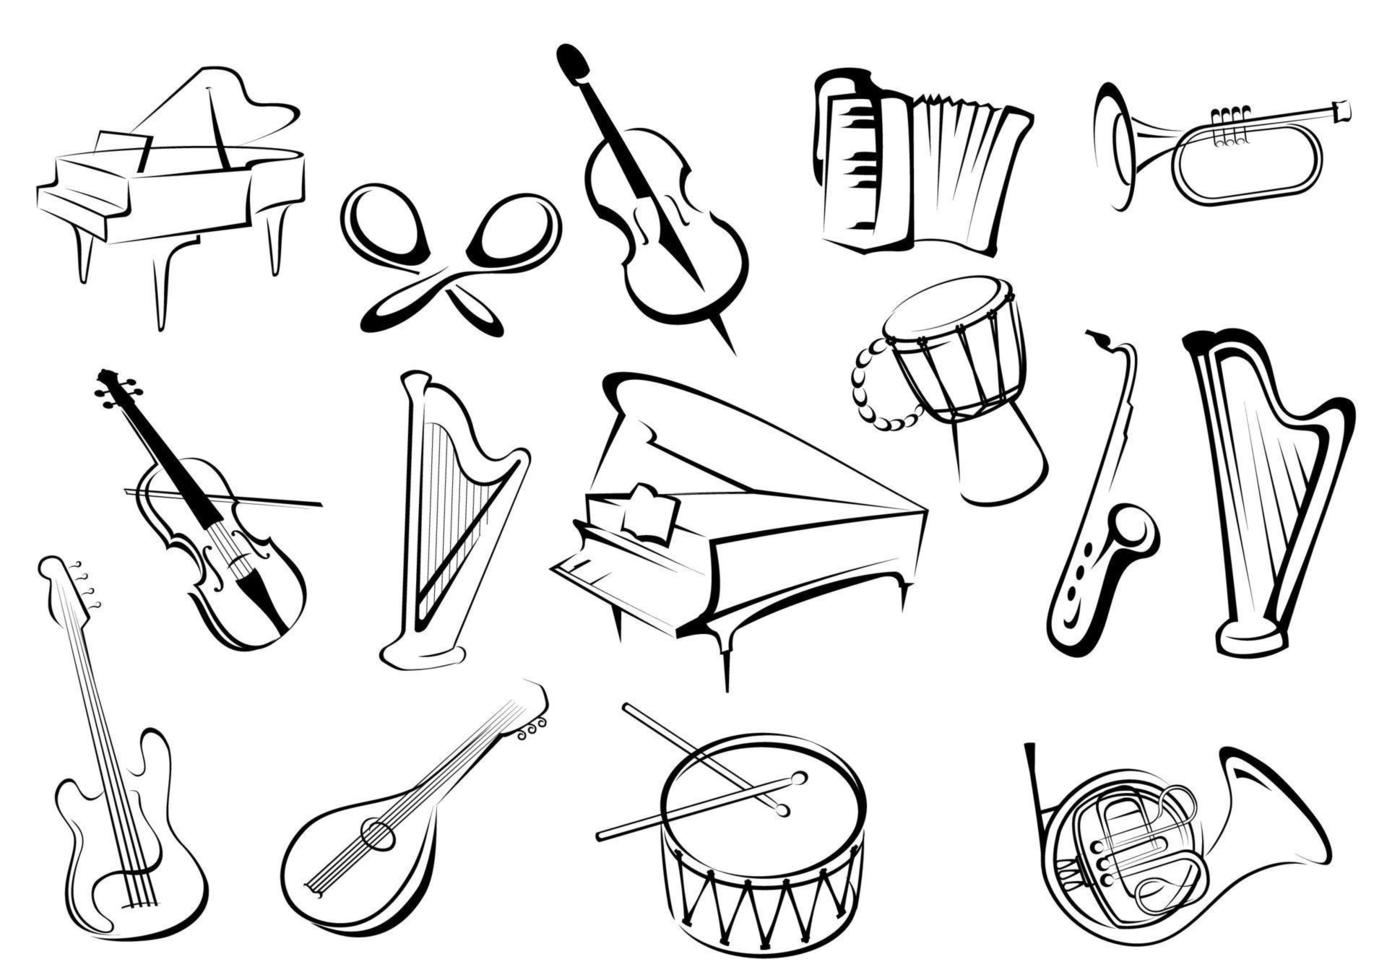 Musical instruments icons in sketch style vector